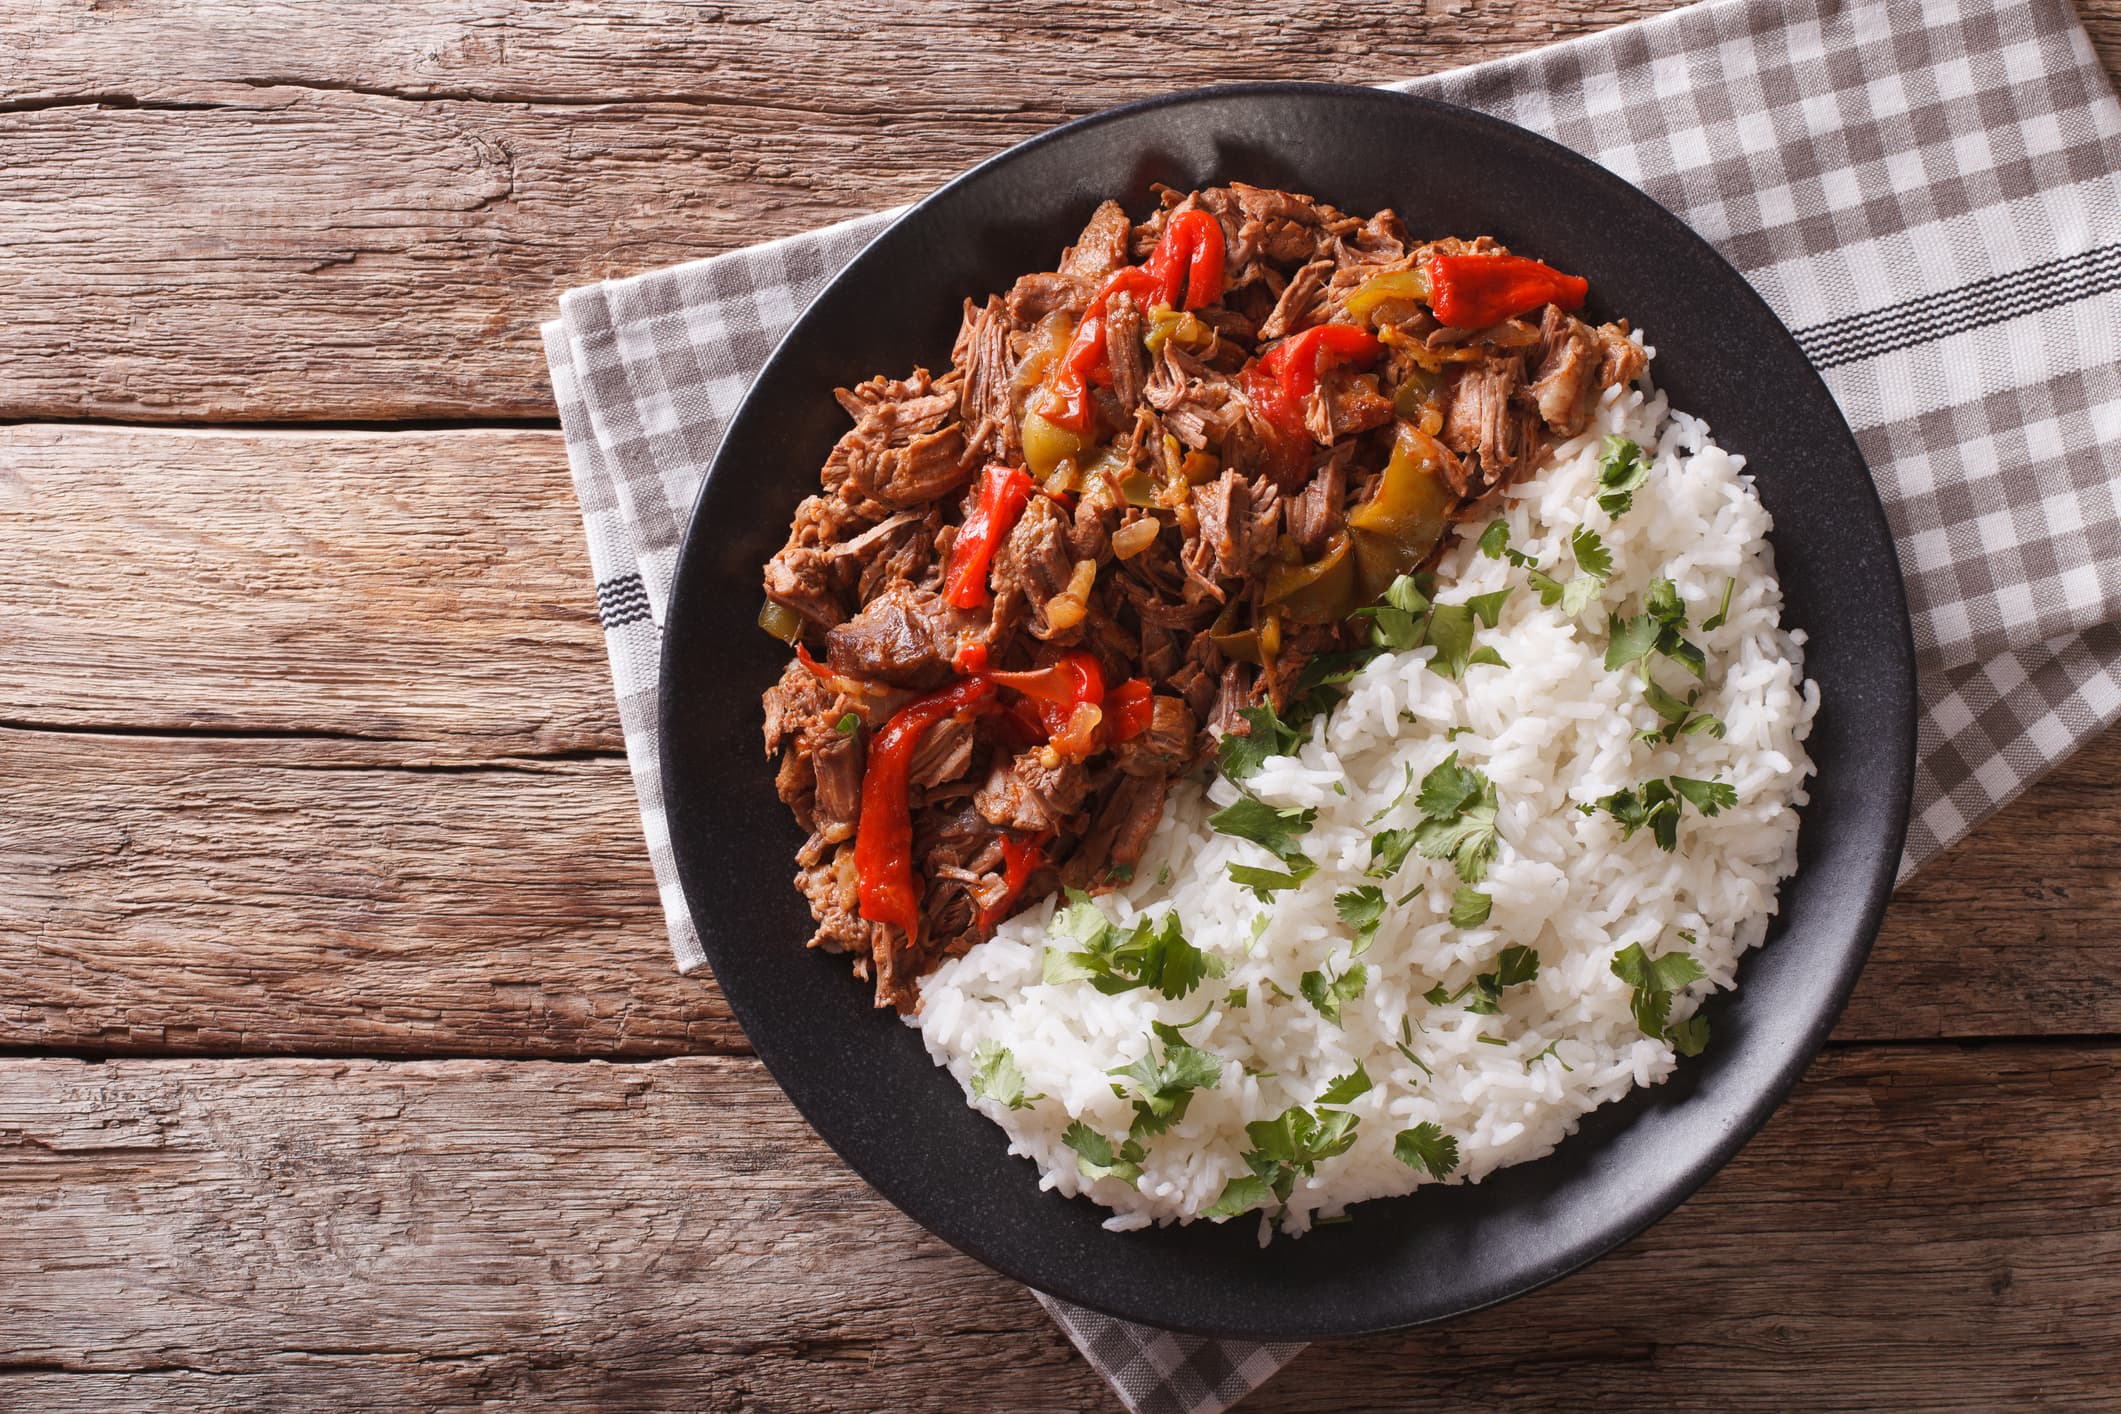 An overhead view of a plate of the Cuban dish Ropa Vieja